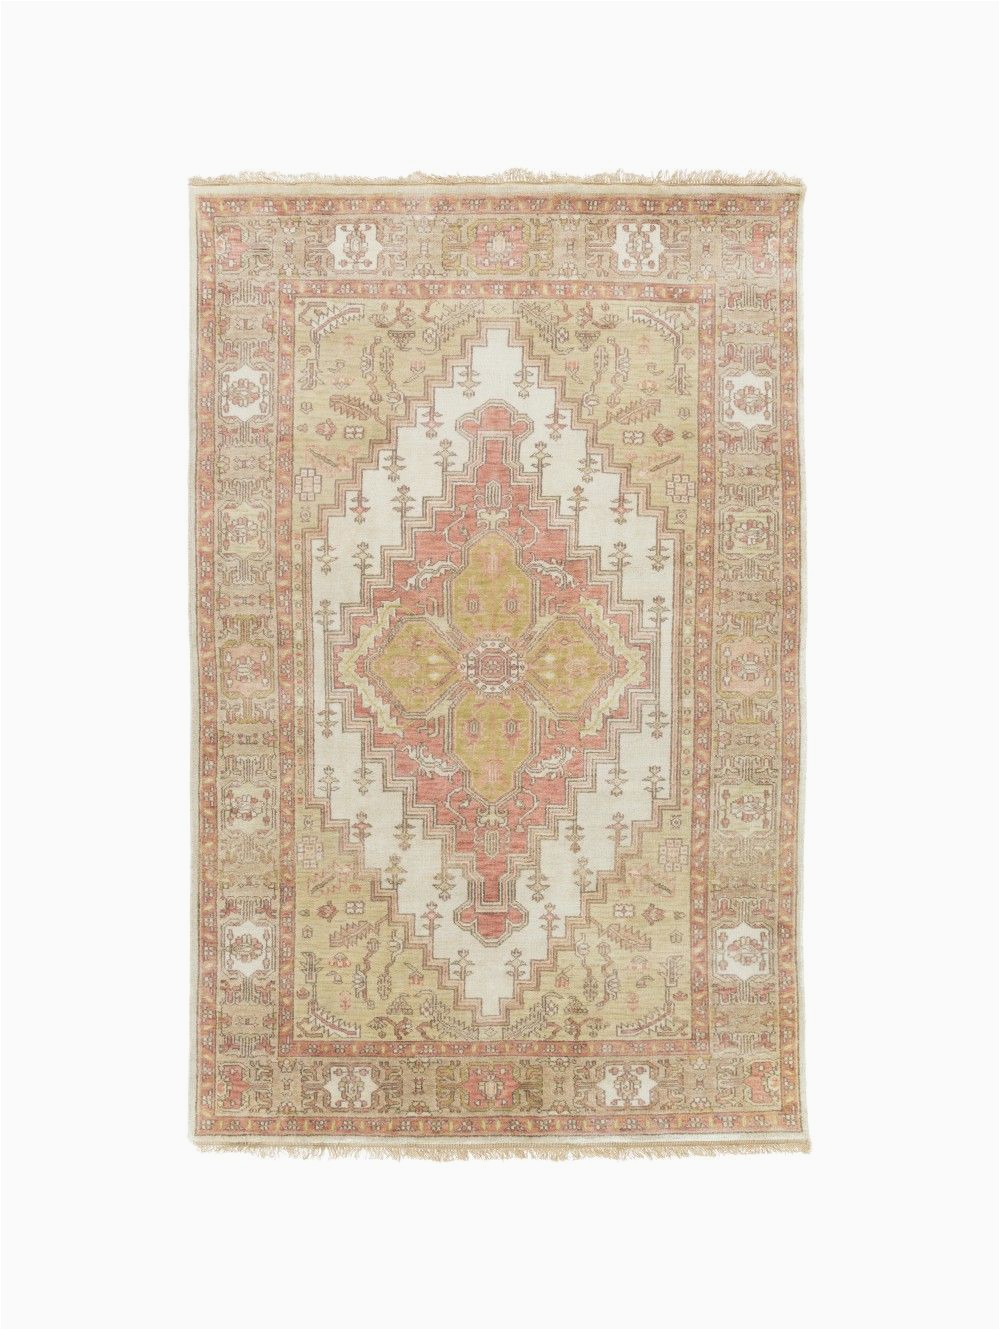 Peach and Blue Persian Style Chenille Oasis area Rug Safina Rug Blush